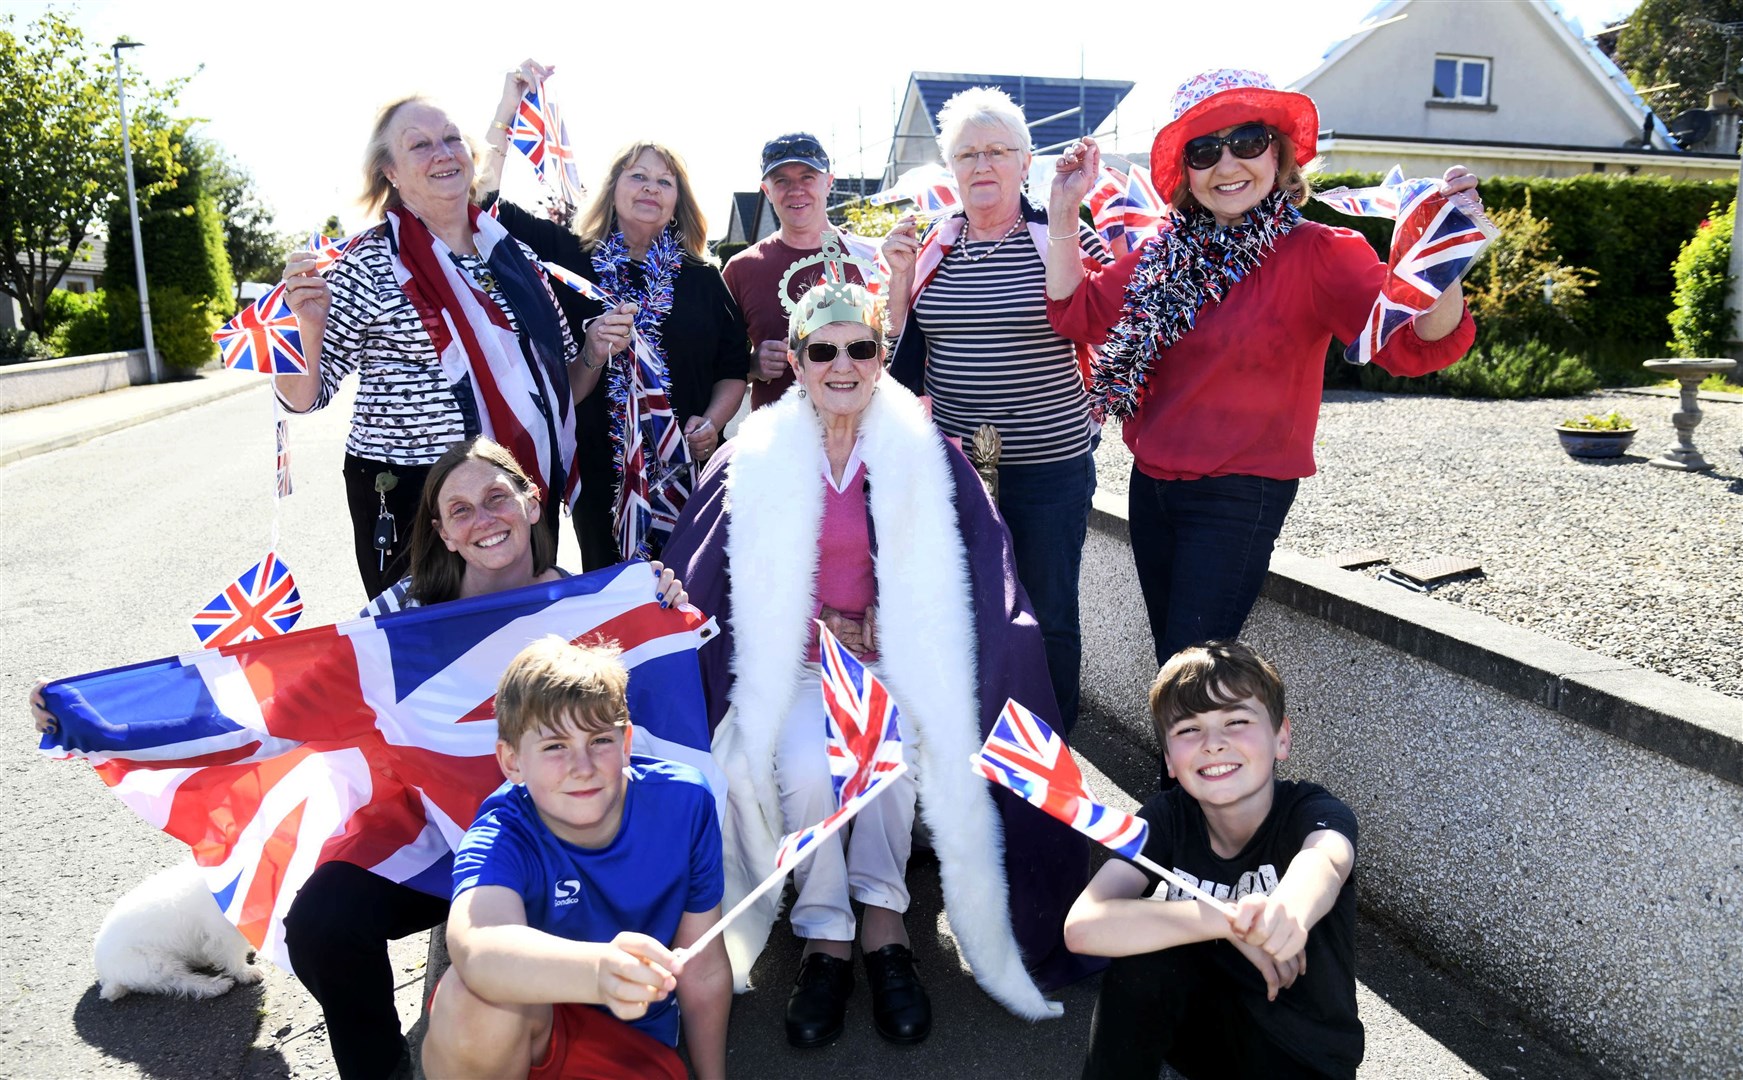 Getting ready for a party. From left, clockwise, Matthew Hanover, Lisa Hanover, Muriel Noble, Norma Watson, Alastair Clarihew, Mieke Lloyd, Louise McLean and Adam McBride, with the Queen for the day Helen McKidd in the middle. Picture: Becky Saunderson